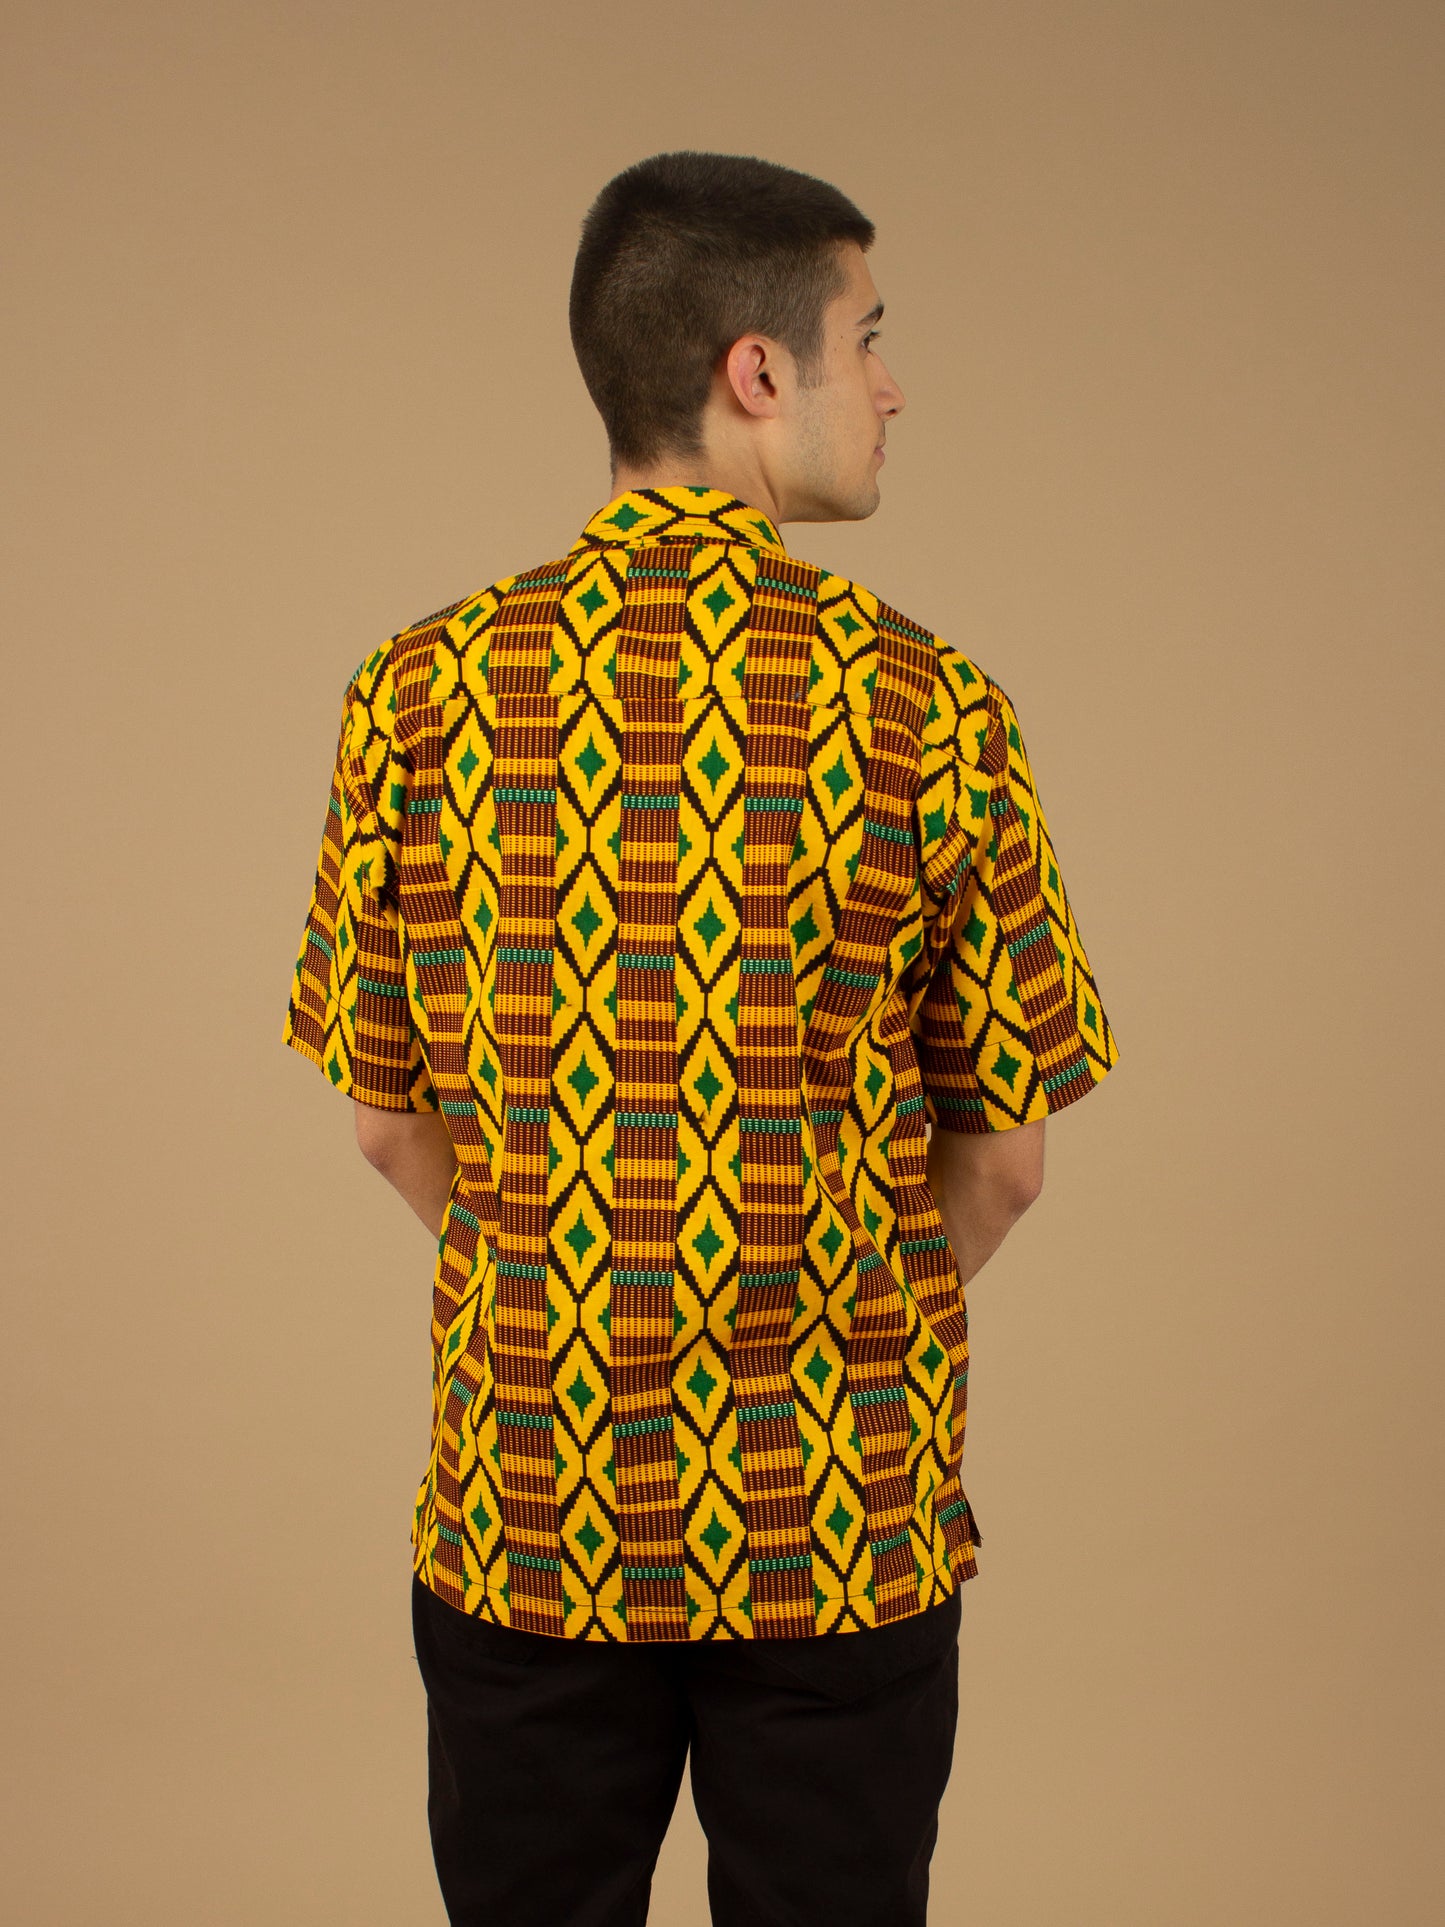 The Adina Kente African printed Button-Up shirt is a striking Diamond geometric kente pattern in  green, yellow and black made from sustainably sourced 100% Cotton. Designed in England Made in Nigeria.